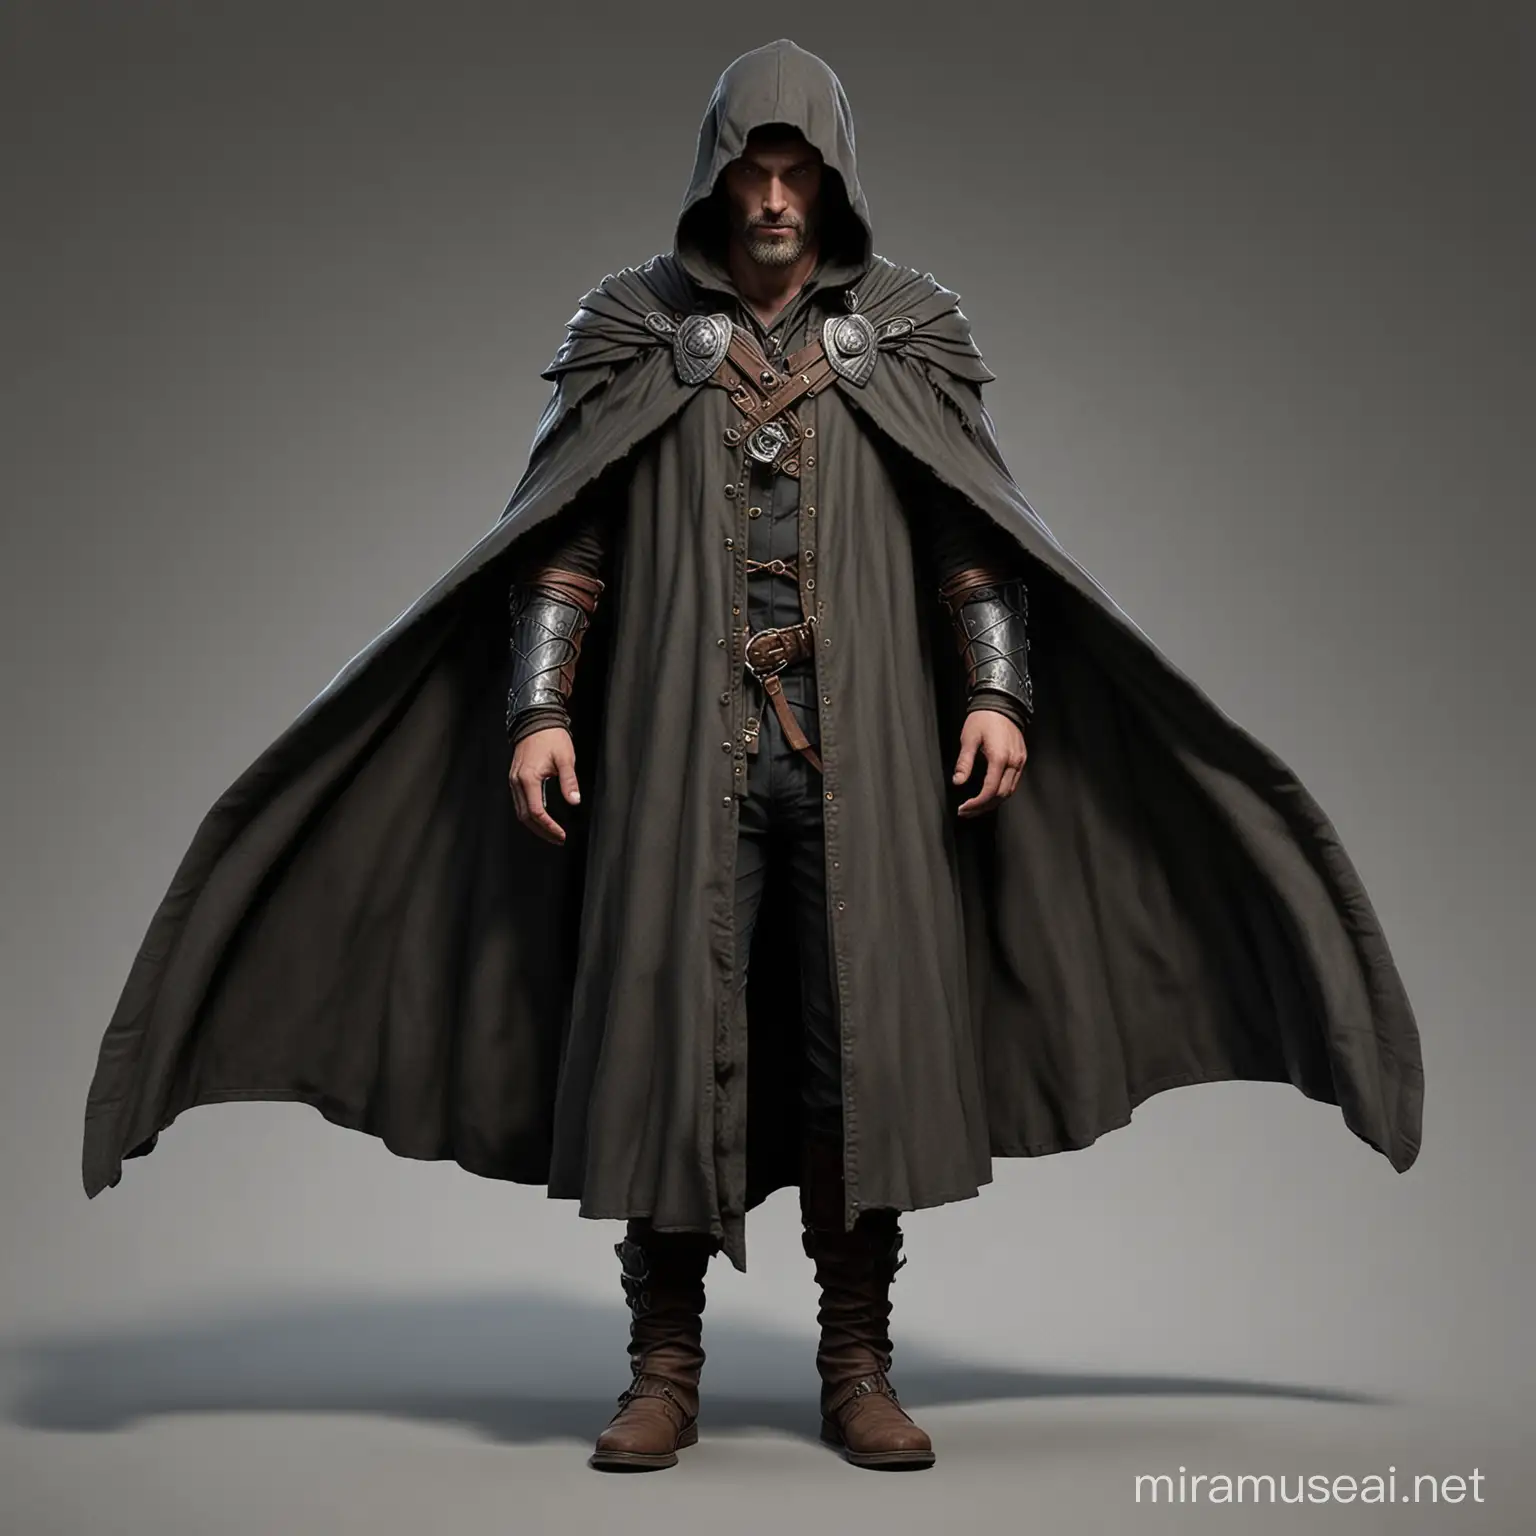 Realistic Dungeons and Dragons Rogue Cloak with Intricate Details